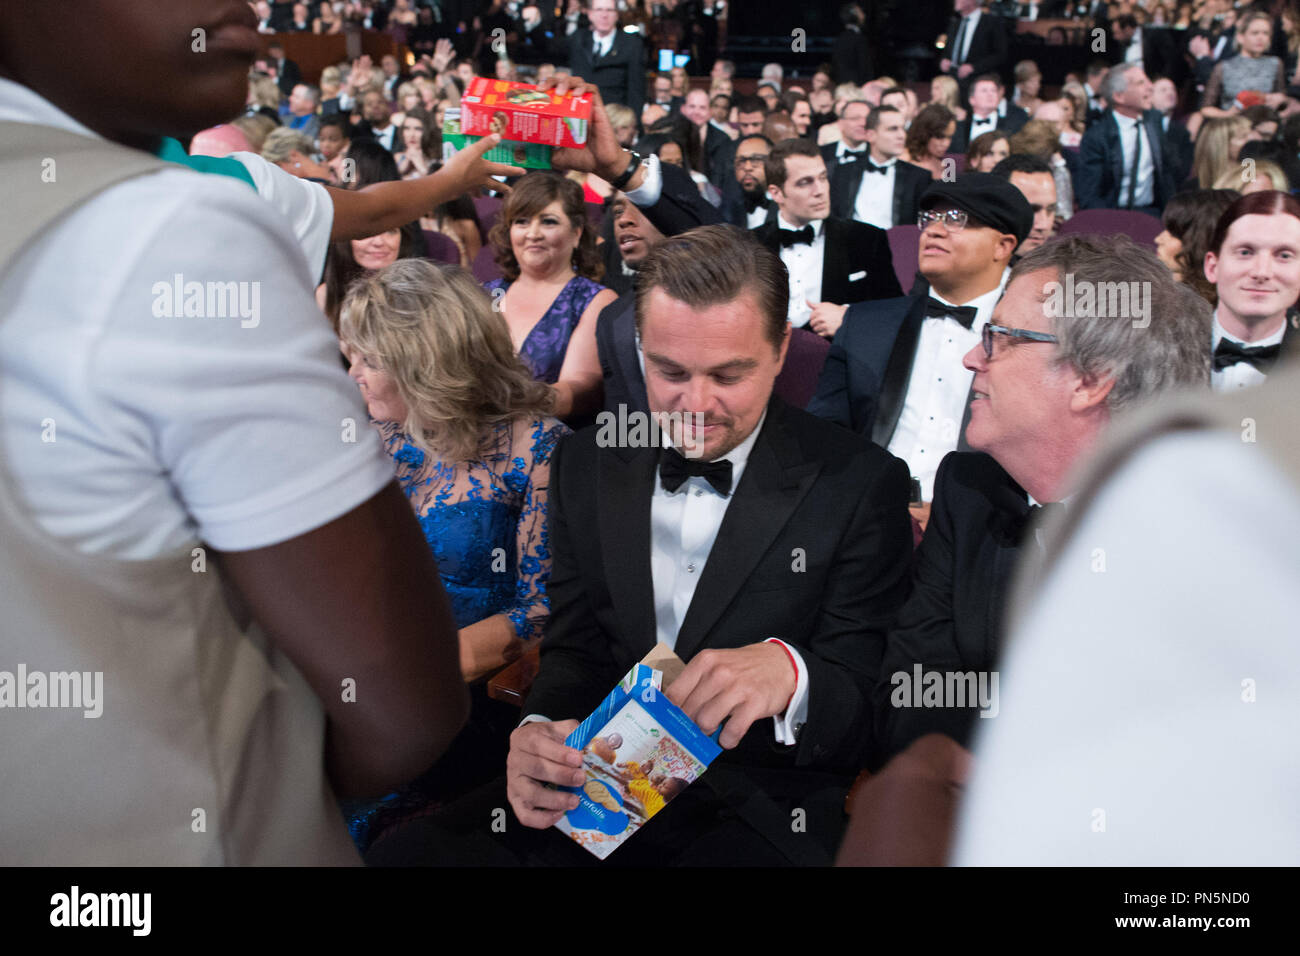 Oscar®-nominee Leonardo DiCaprio buys Girl Scout Cookies during the live ABC Telecast of The 88th Oscars® at the Dolby® Theatre in Hollywood, CA on Sunday, February 28, 2016.  File Reference # 32854 754THA  For Editorial Use Only -  All Rights Reserved Stock Photo